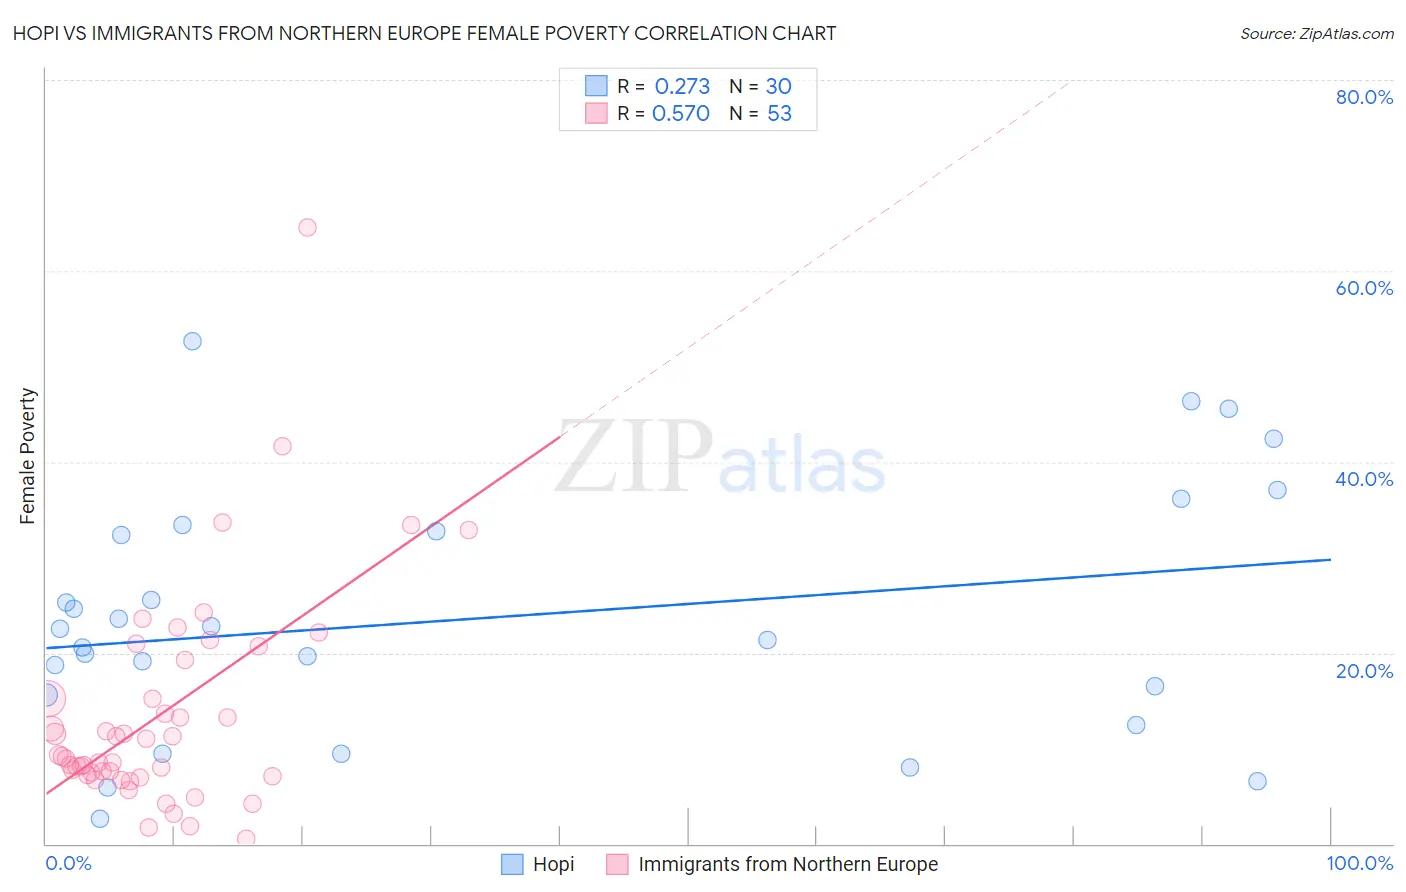 Hopi vs Immigrants from Northern Europe Female Poverty